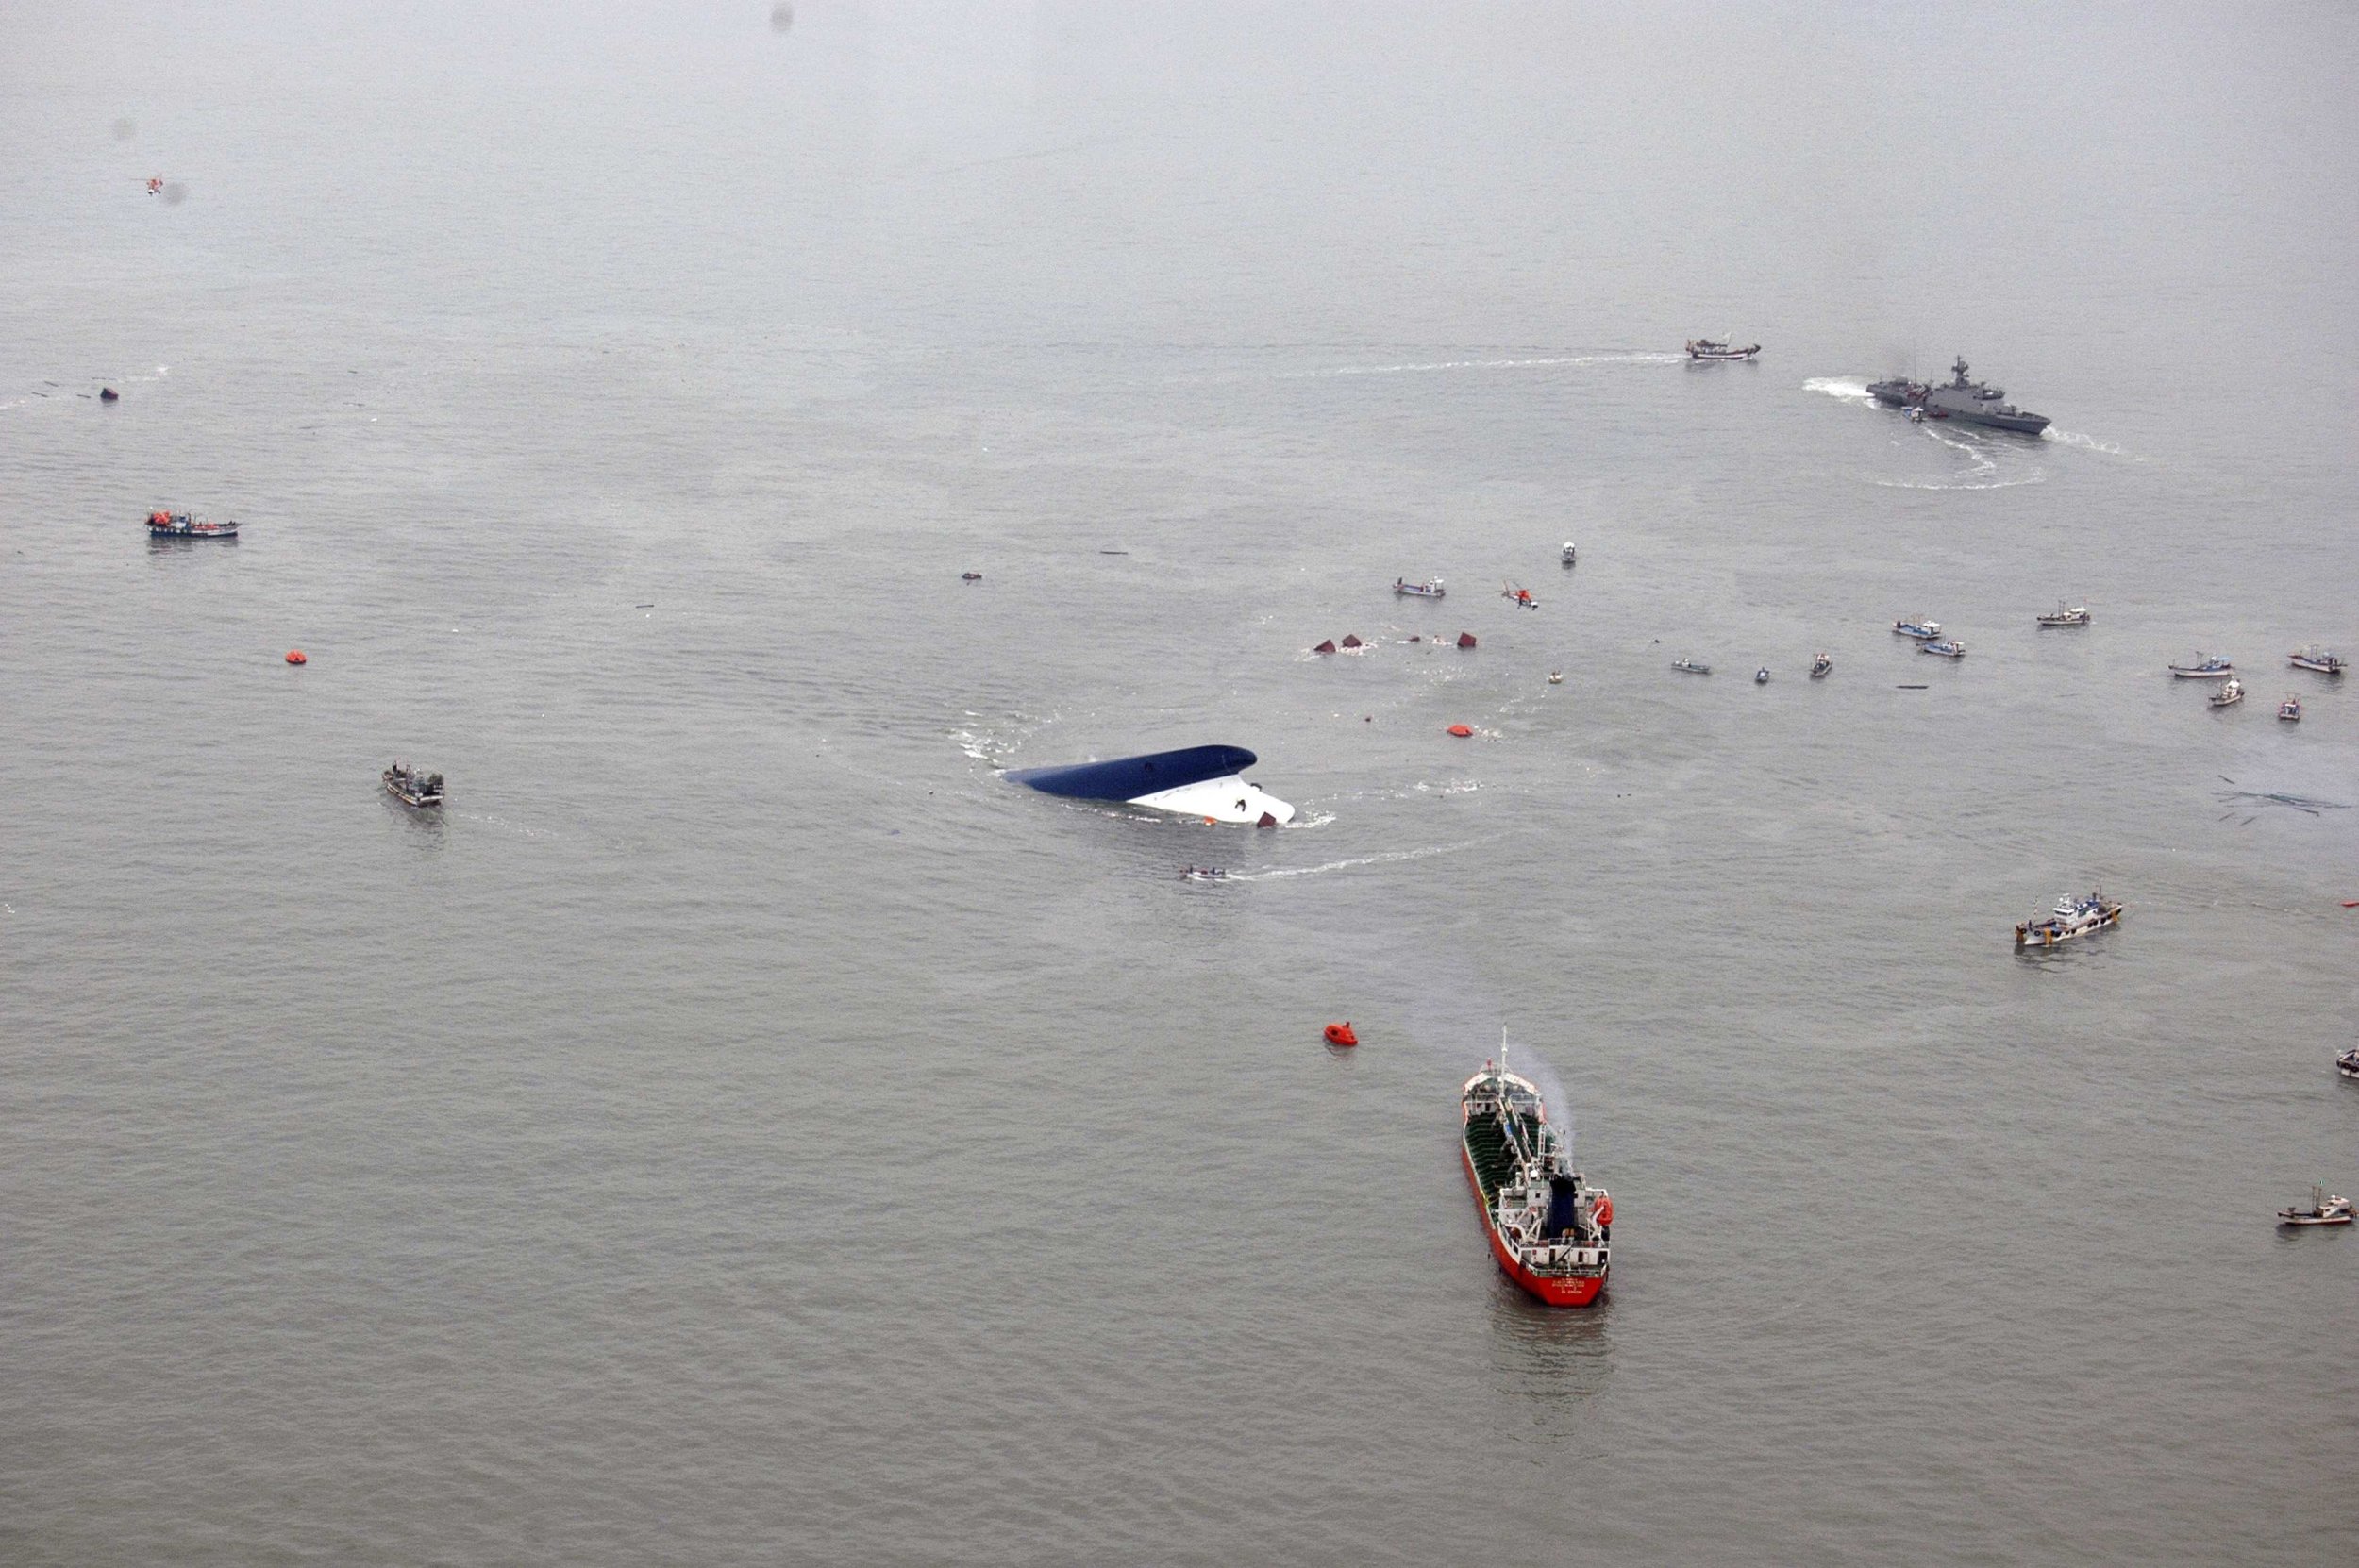 South Korea Ferry - Sewol Overview